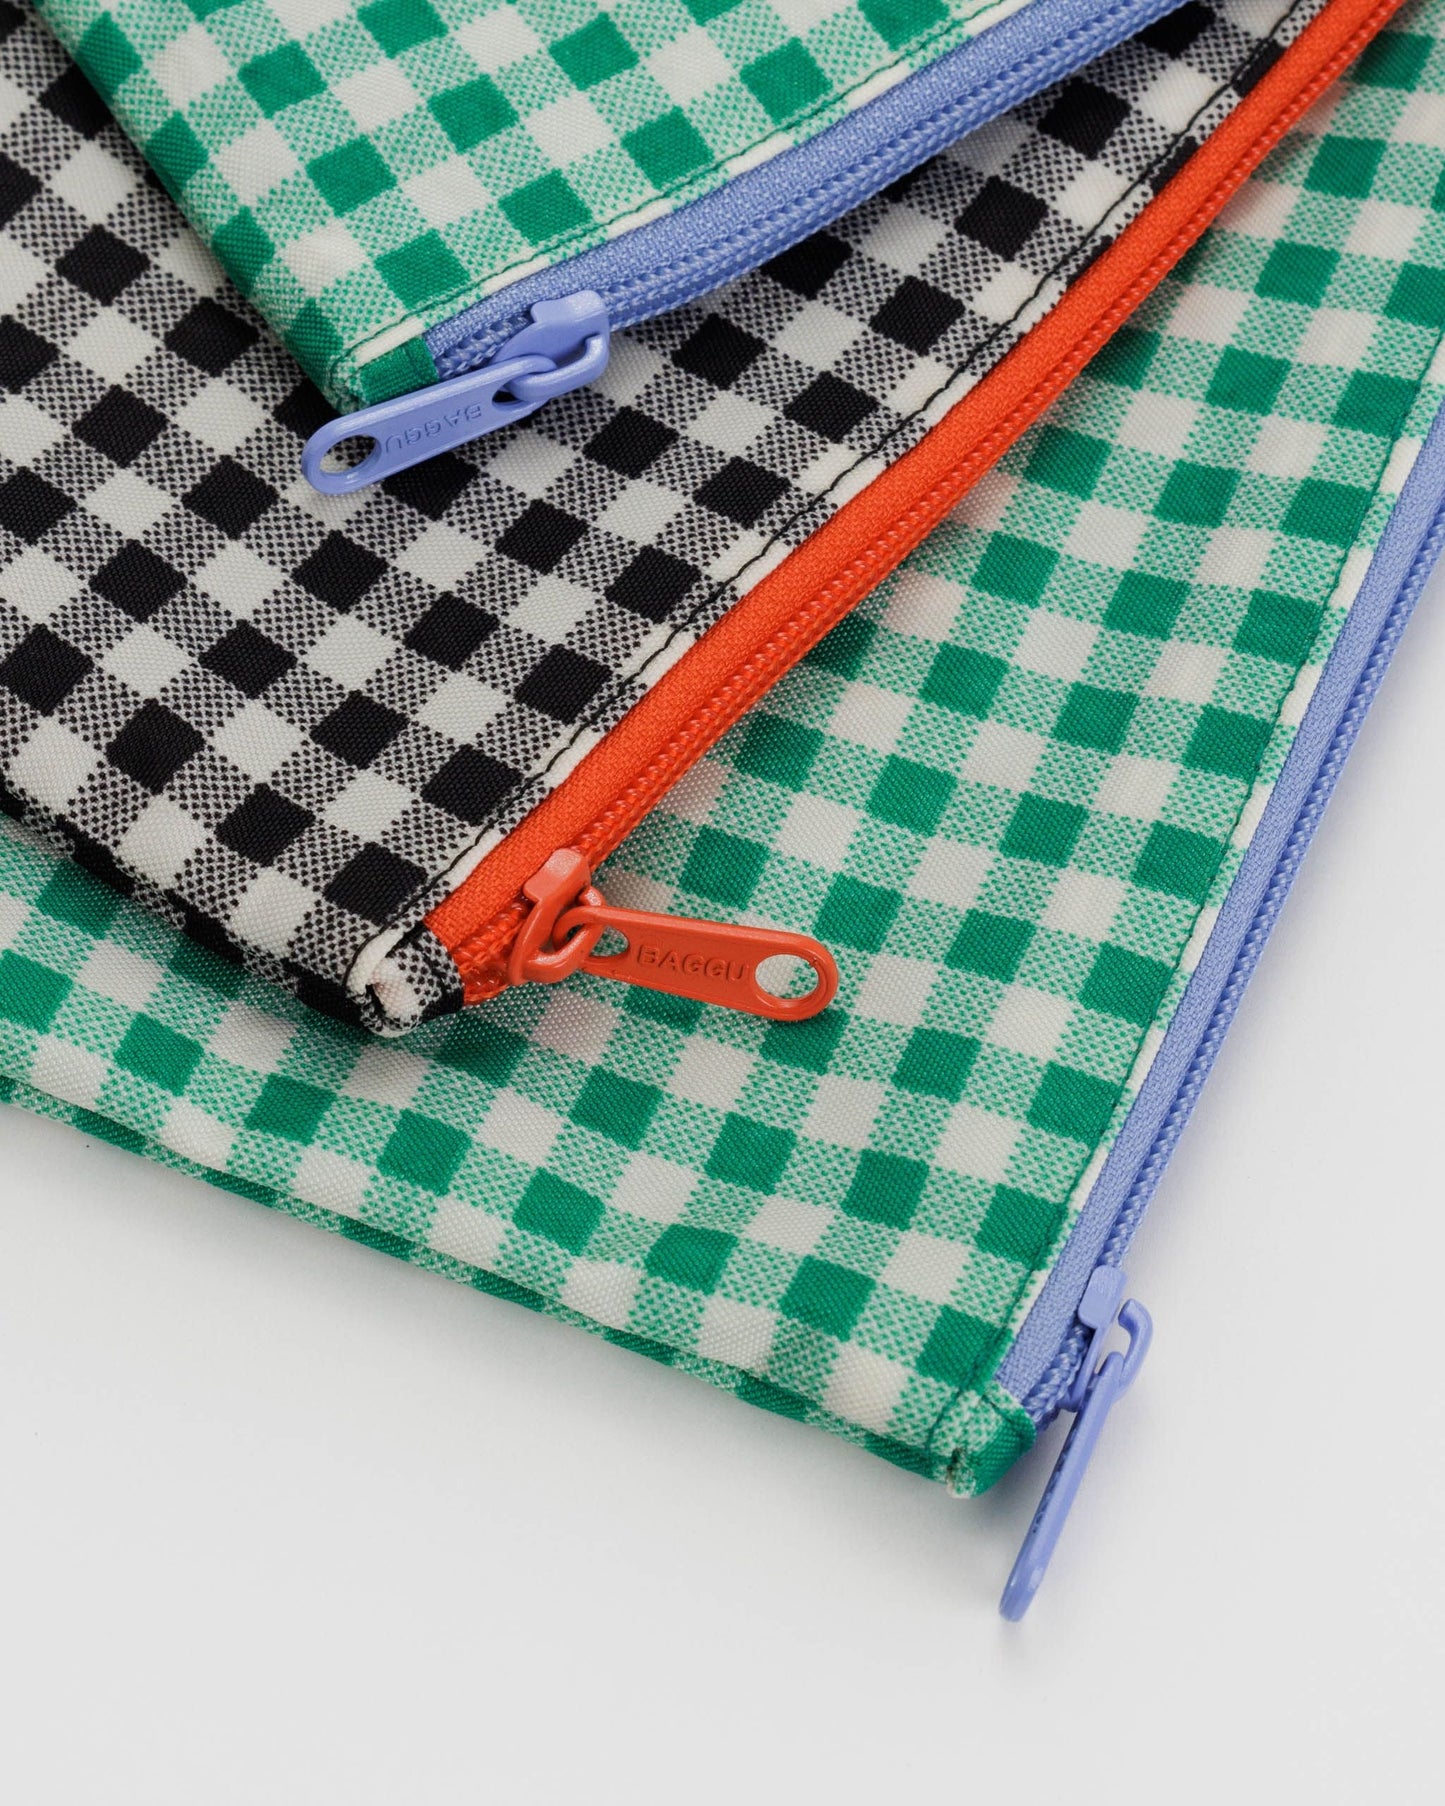 Gingham Flat Pouch